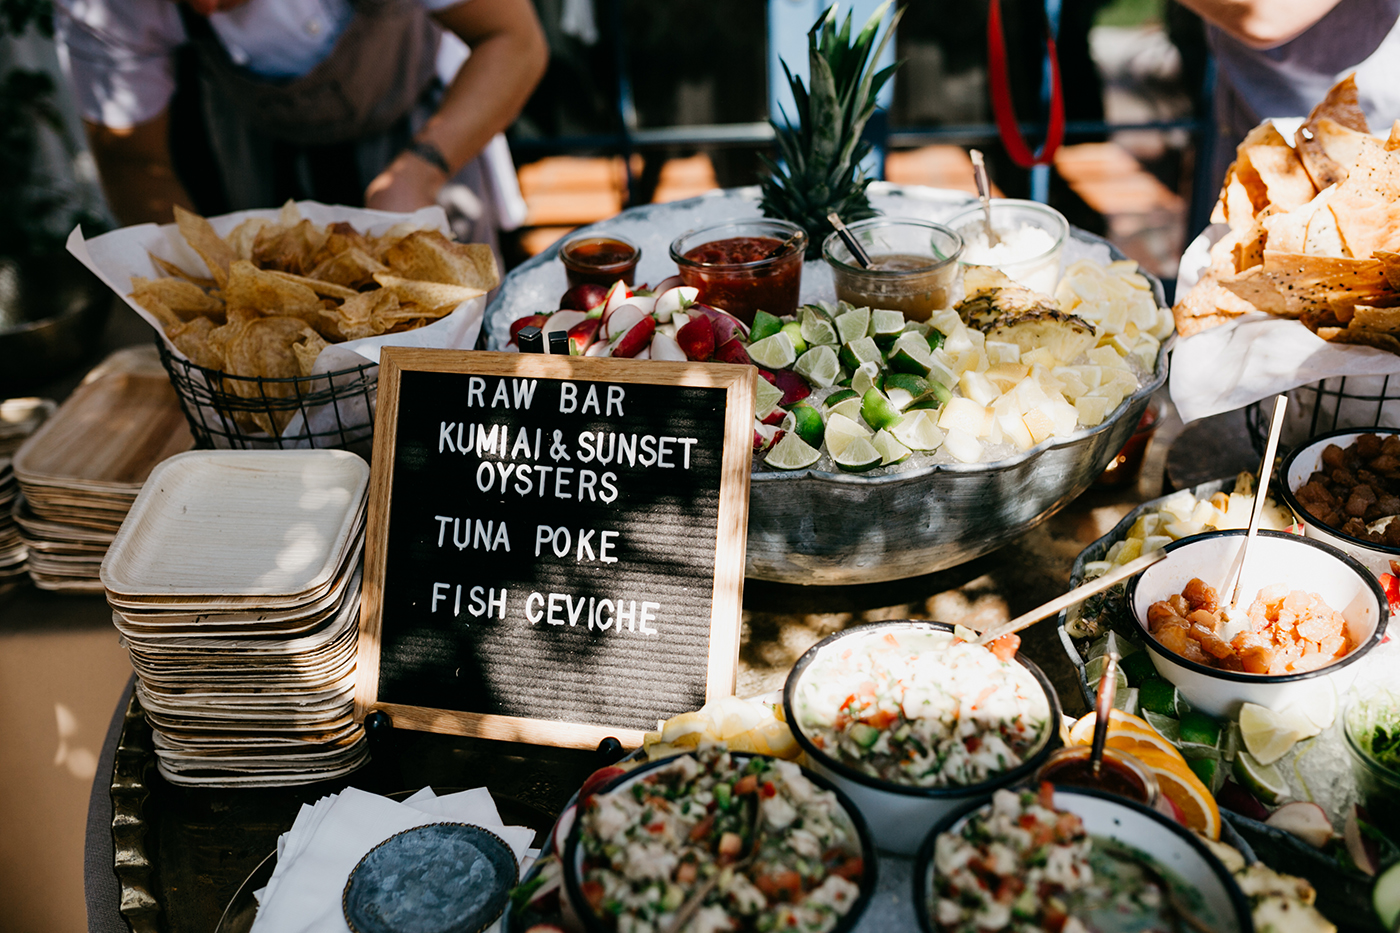 5 Wedding Catering Styles: Which One is Right for Your Reception Menu?